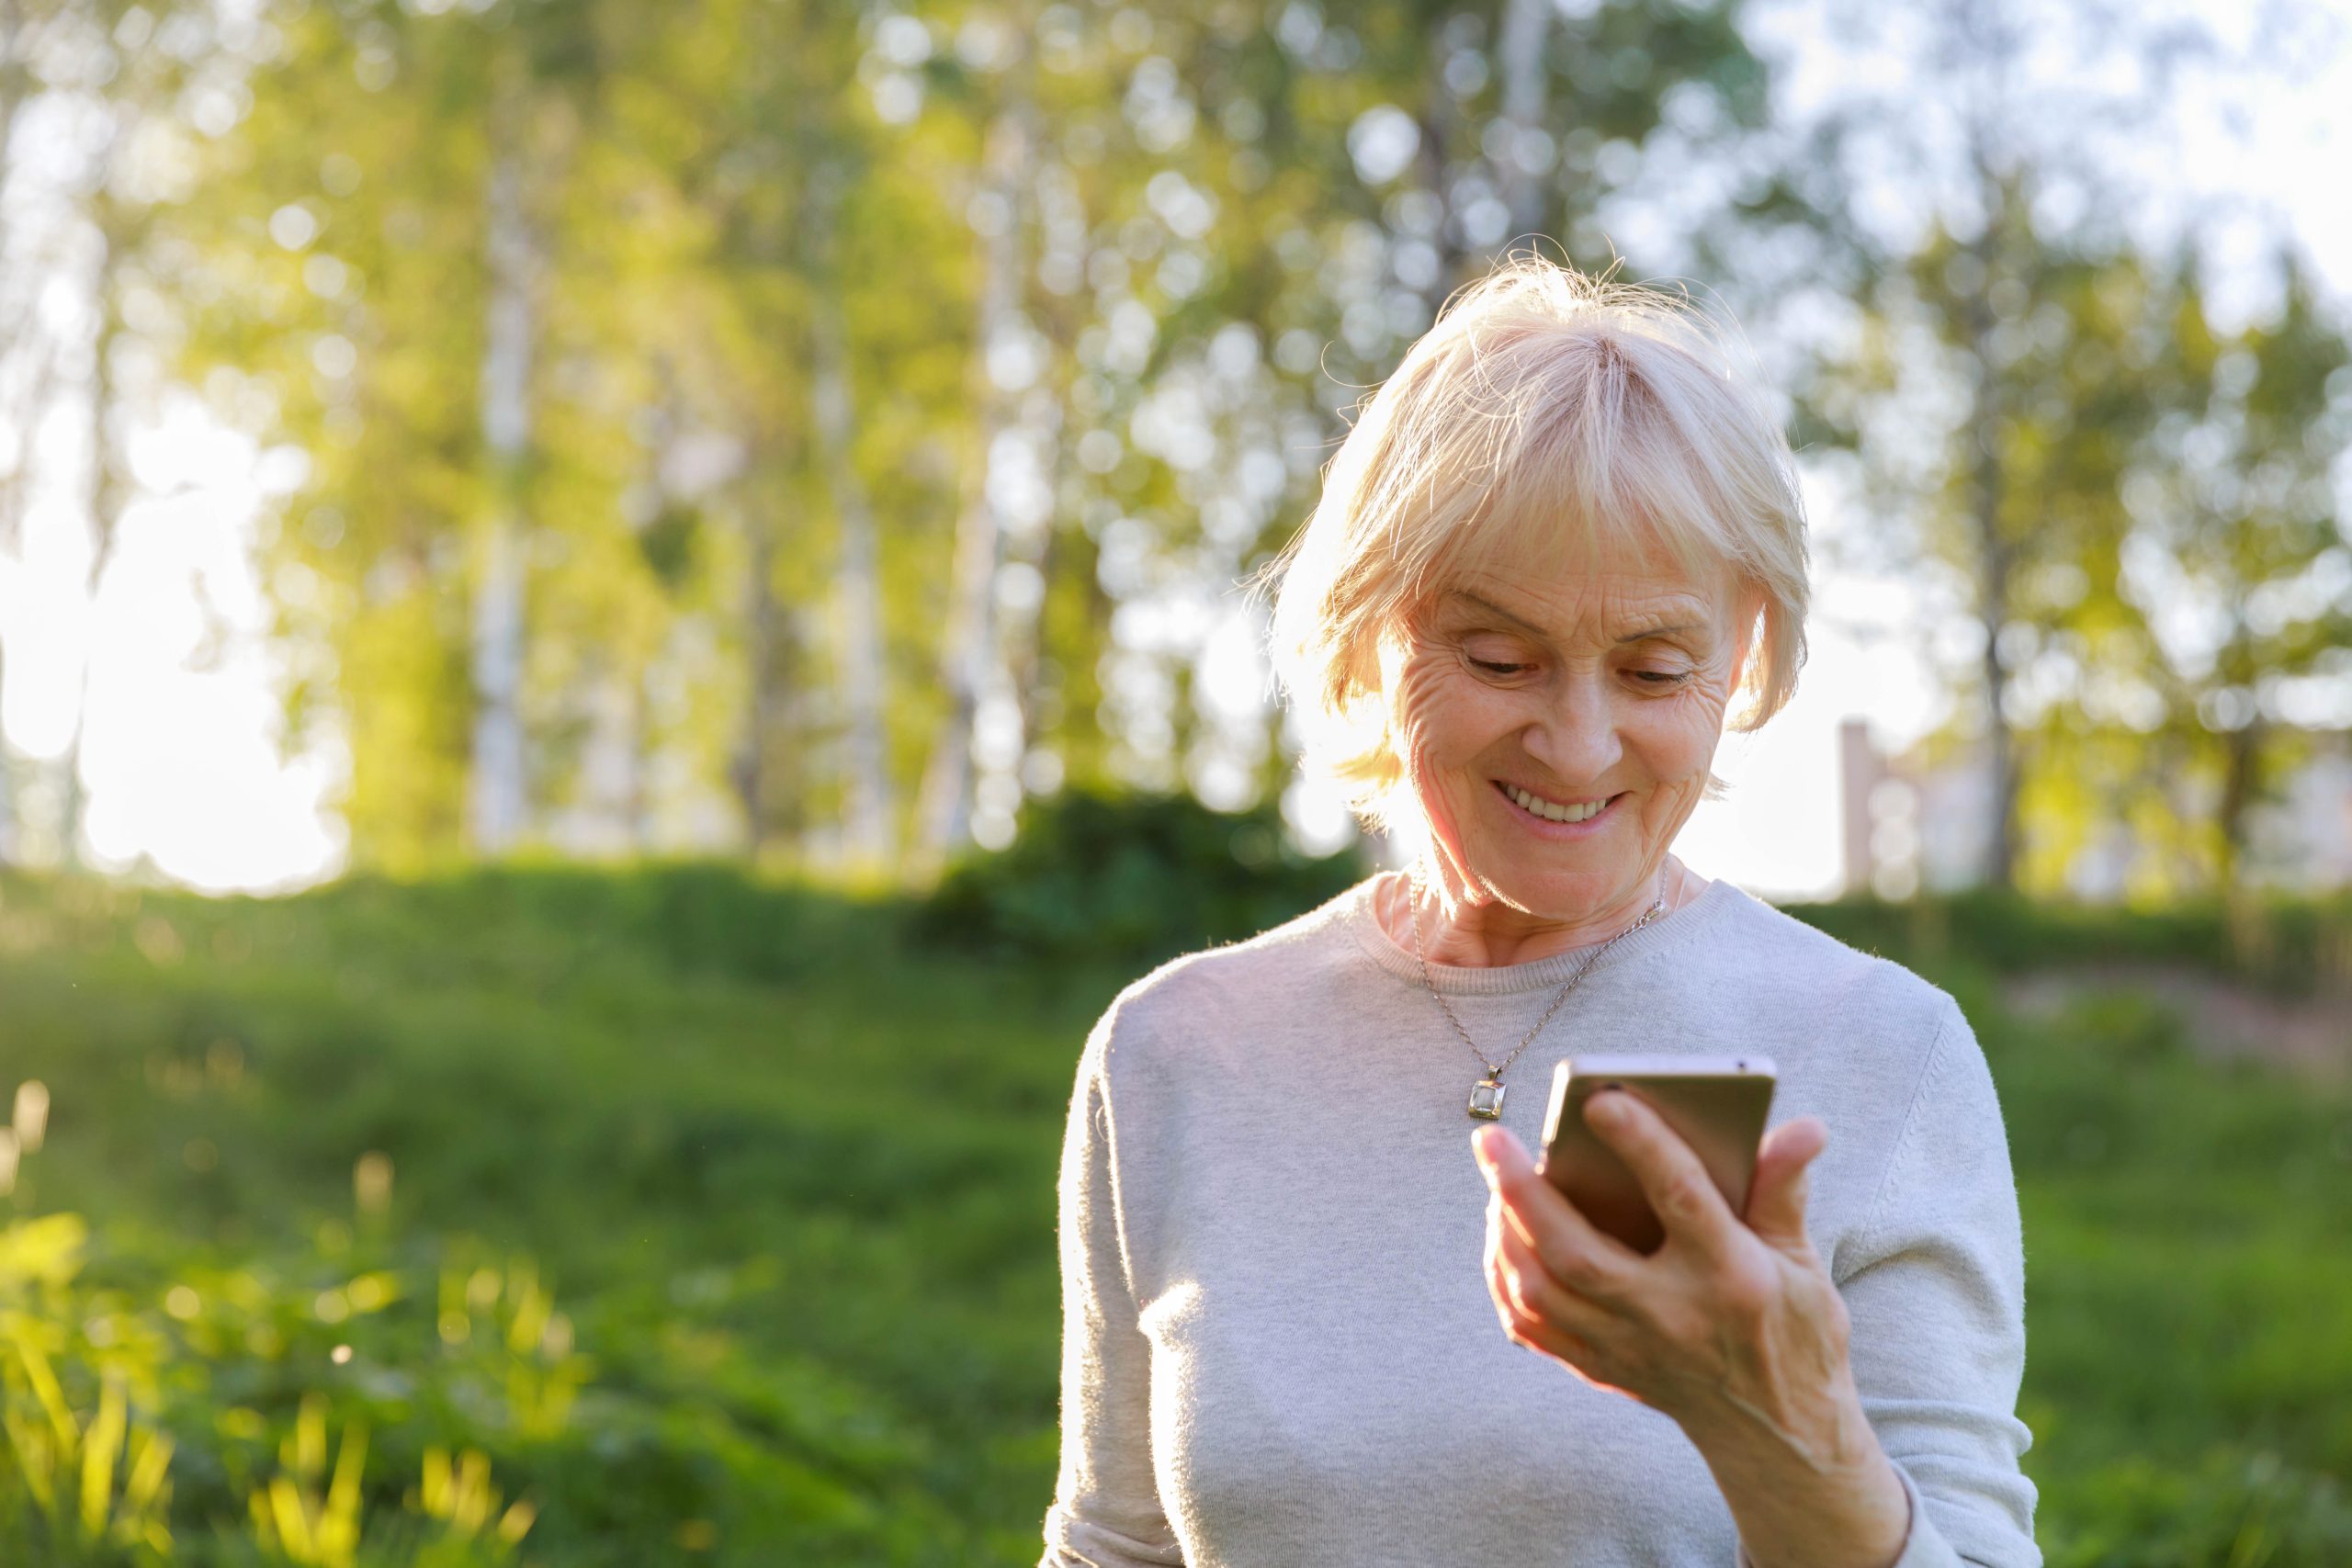 Elderly woman is holding a phone in a sunny park. Show care and